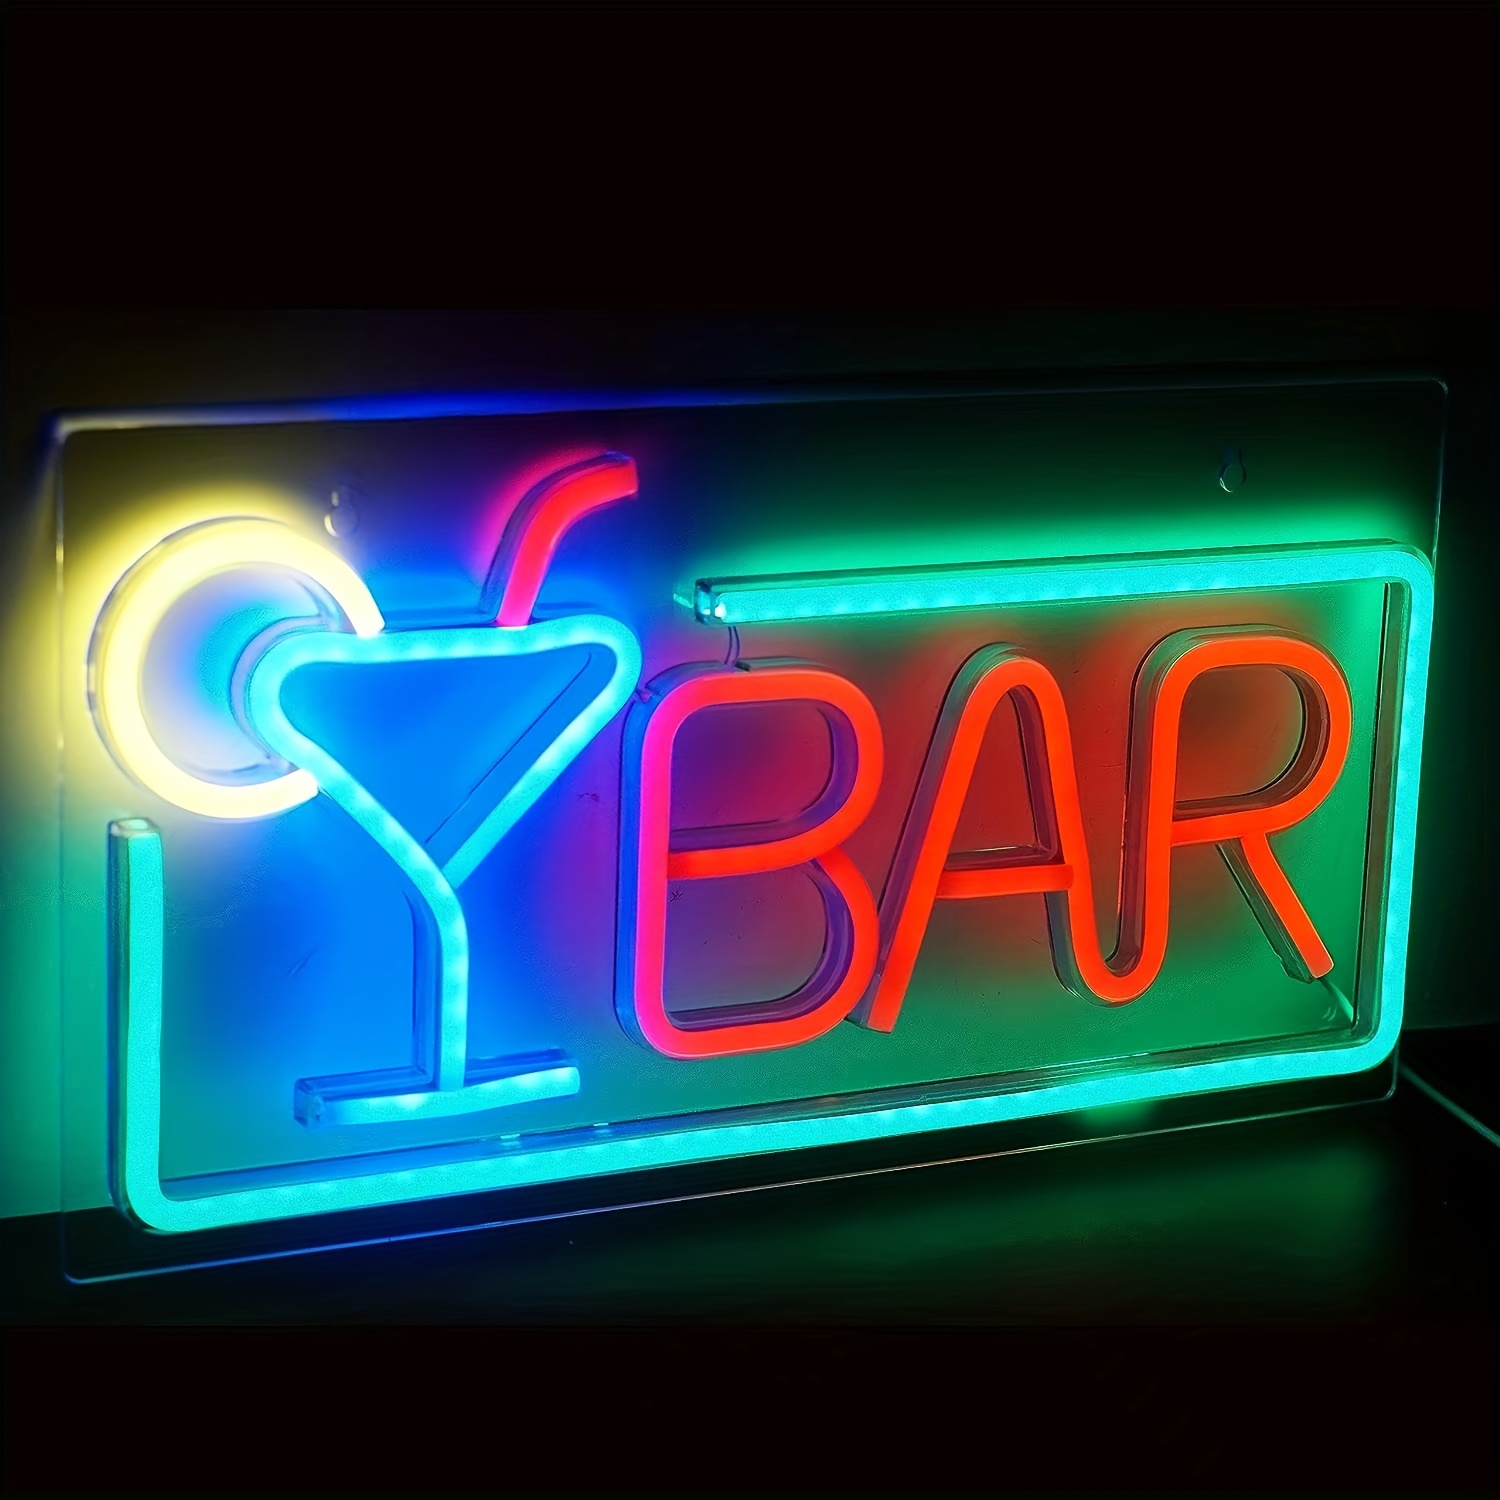  Among Us Neon Sign for Wall Decor, Cool Led Neon Lamp  USB&Batteries Powered, Neon Lights for Bedroom,Game Room Decor,Gamer  Gift,Party,Club,Bar,Birthday : Tools & Home Improvement